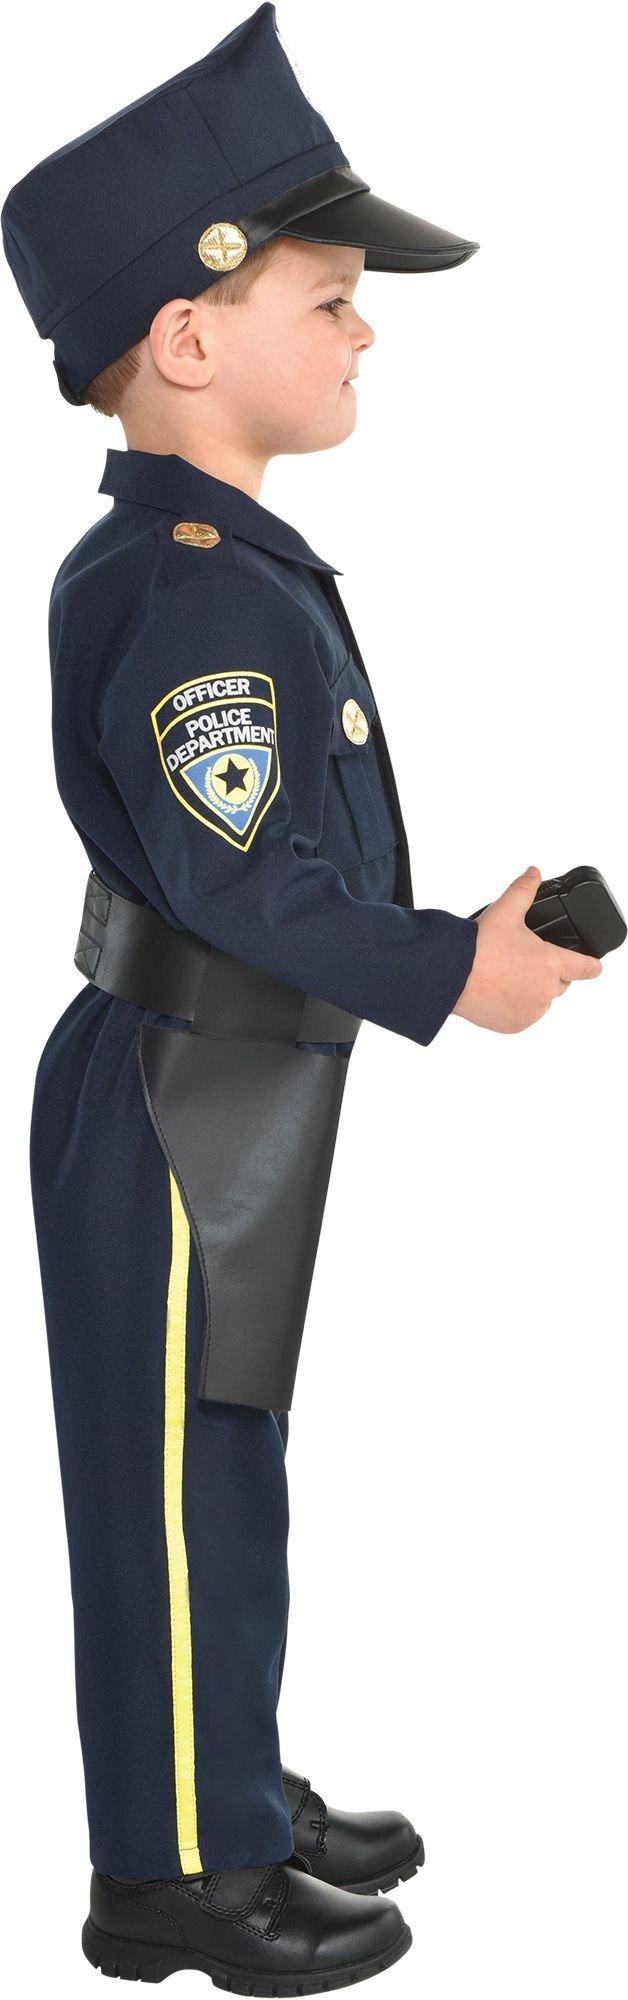 Deluxe Toddler Police Officer Costume